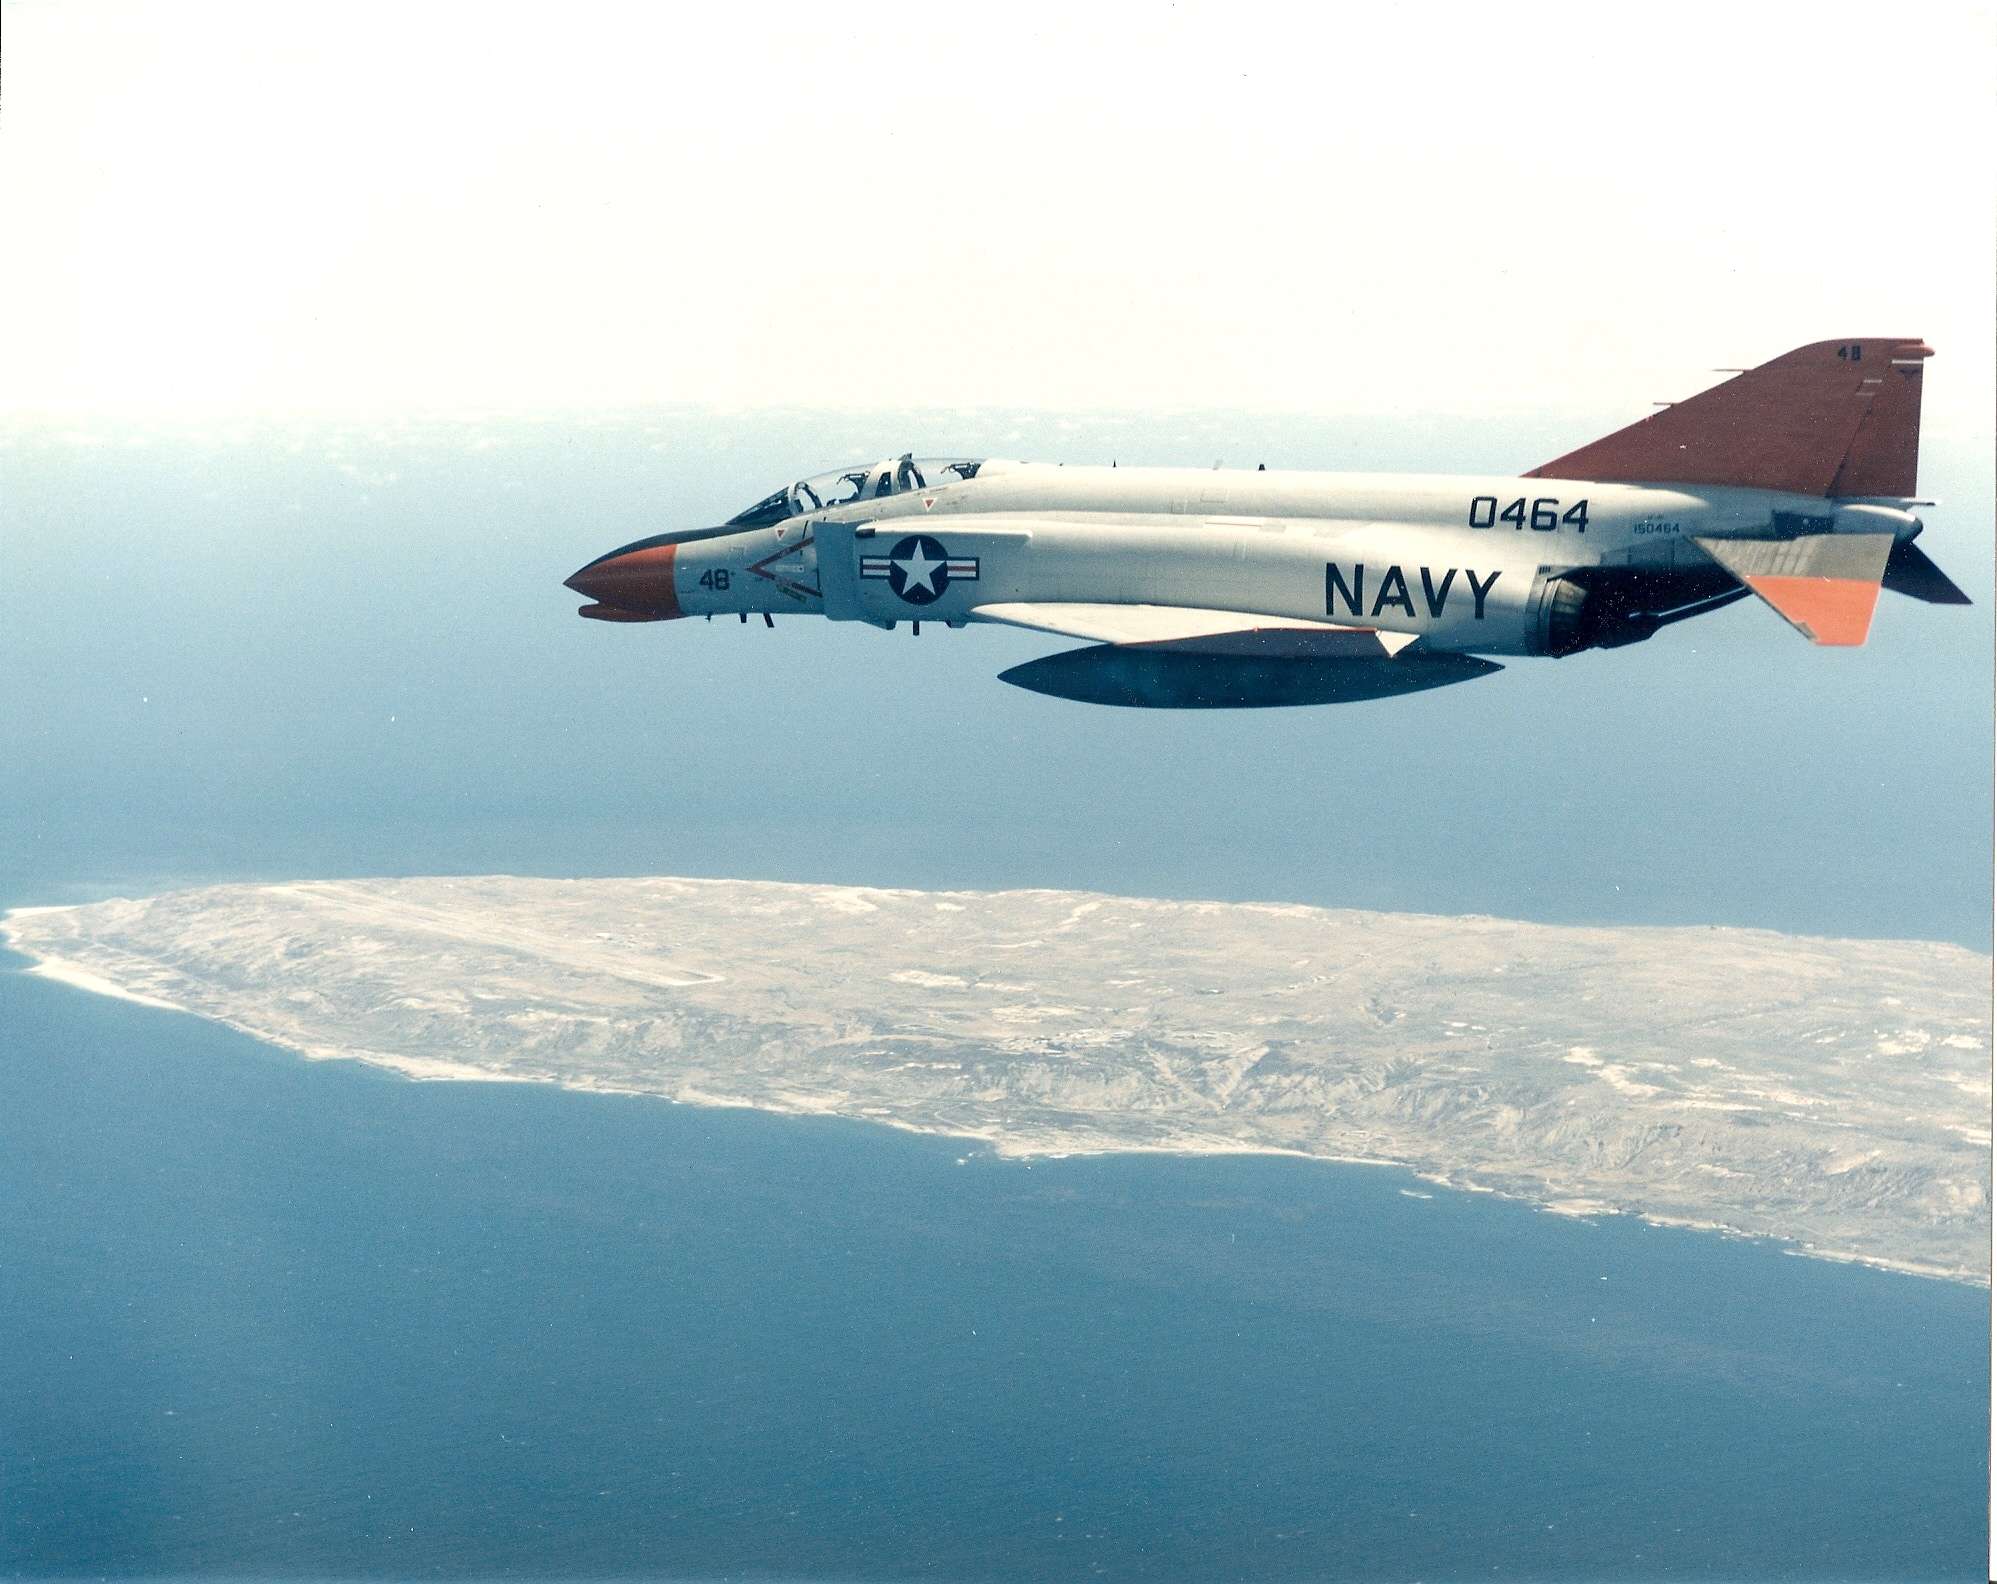 Why the F-4 Phantom is one of the US military’s most beloved airplanes